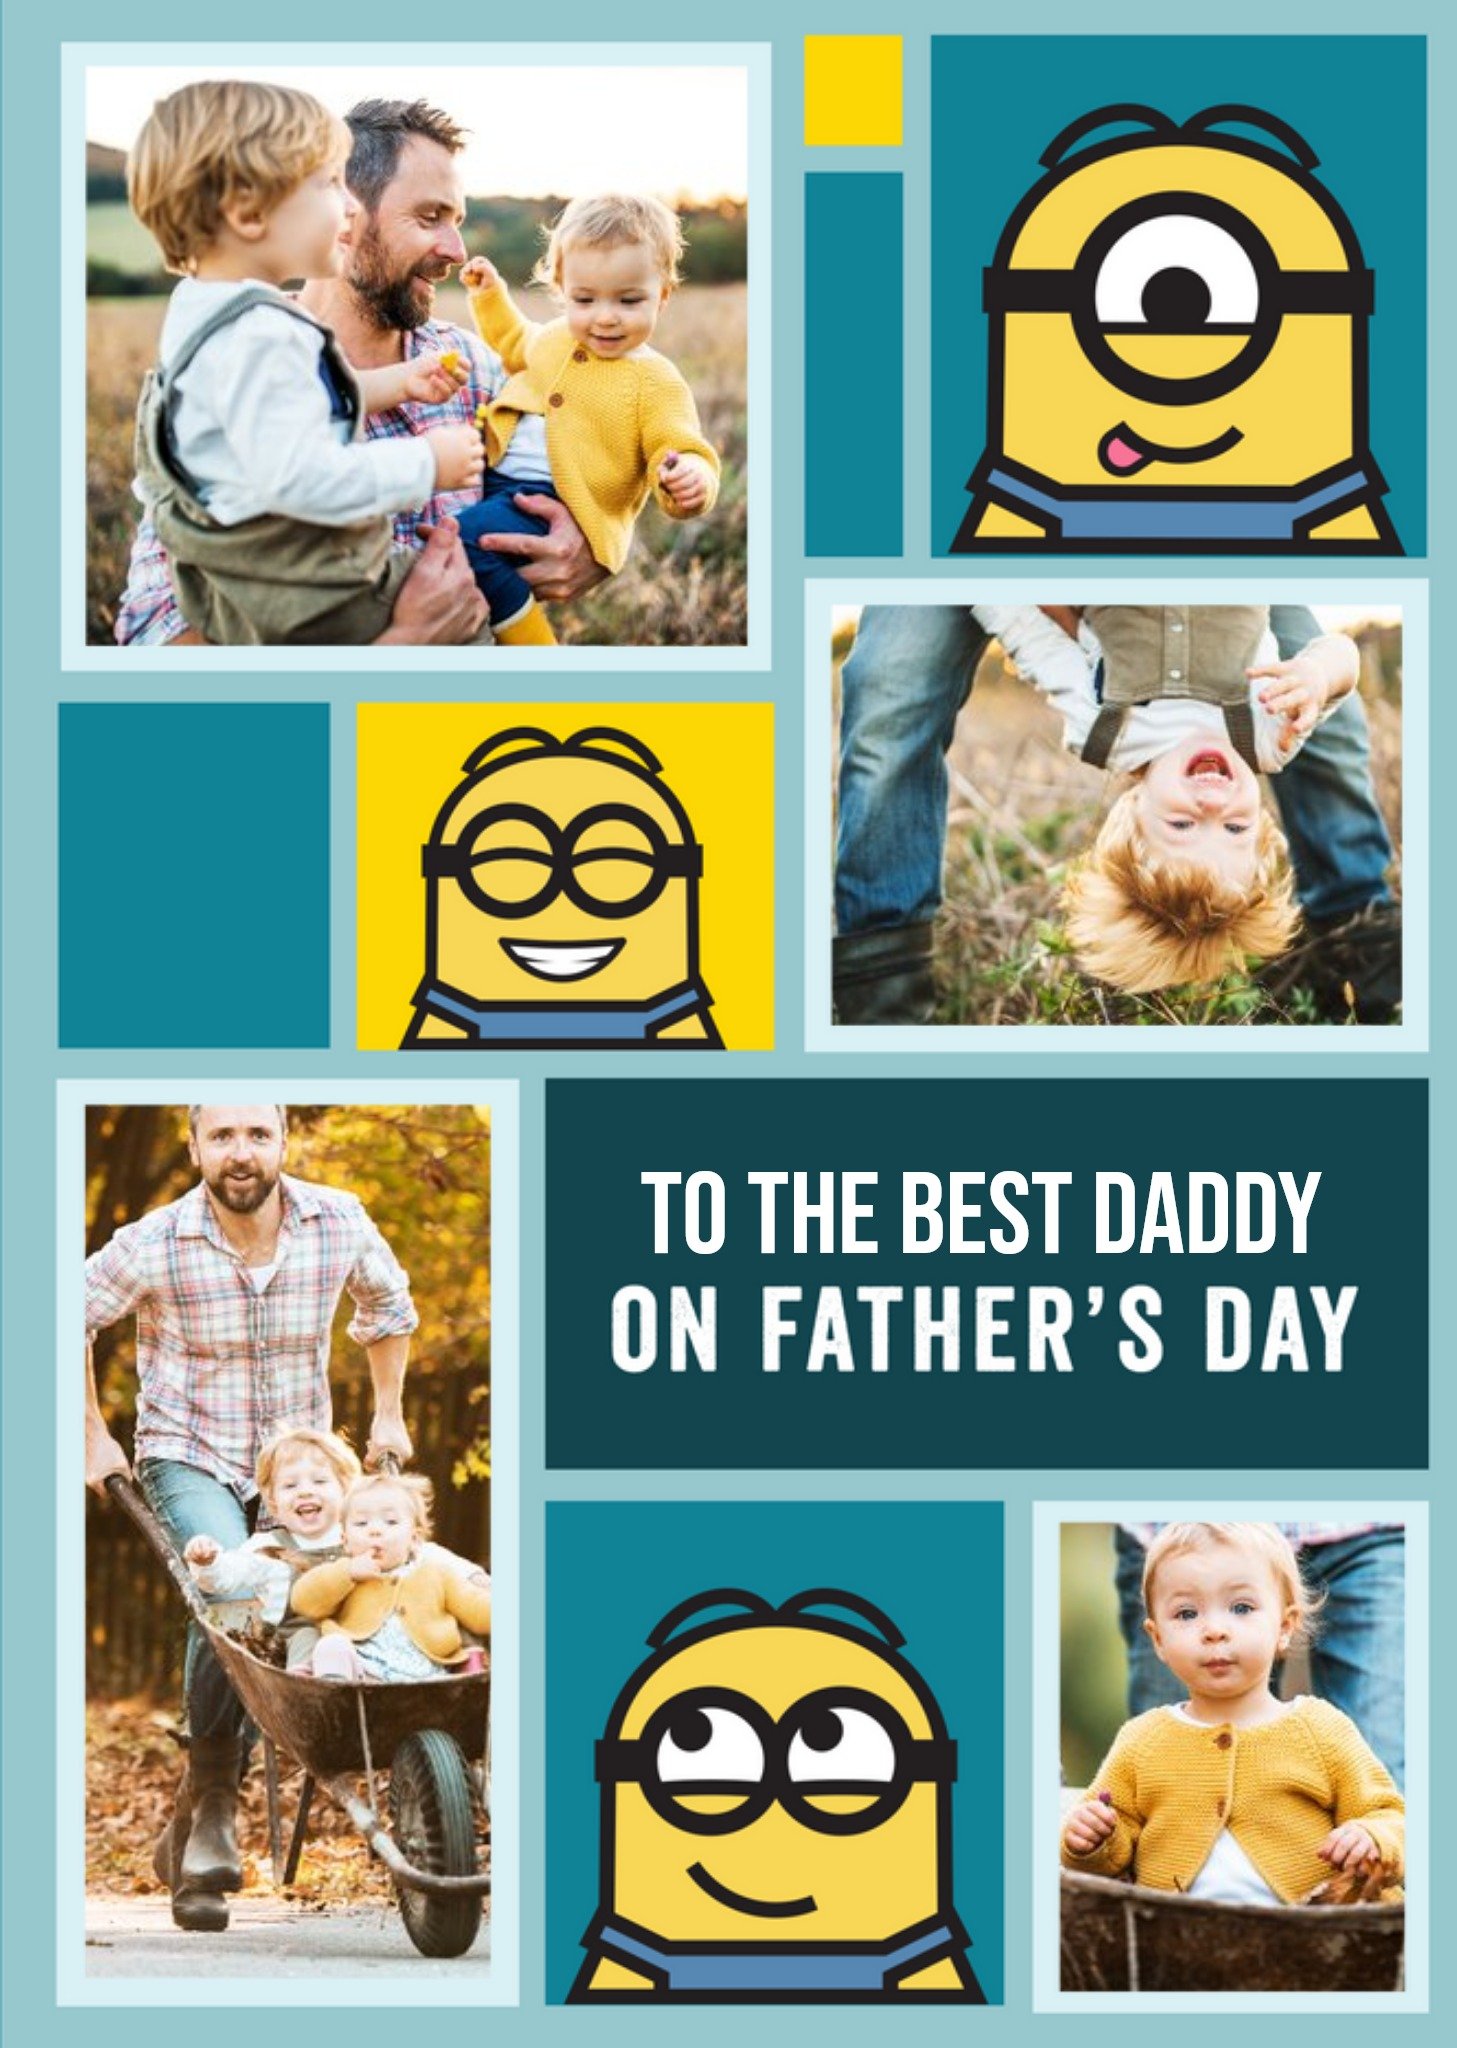 Despicable Me Minions Best Daddy Photo Upload Father's Day Card Ecard